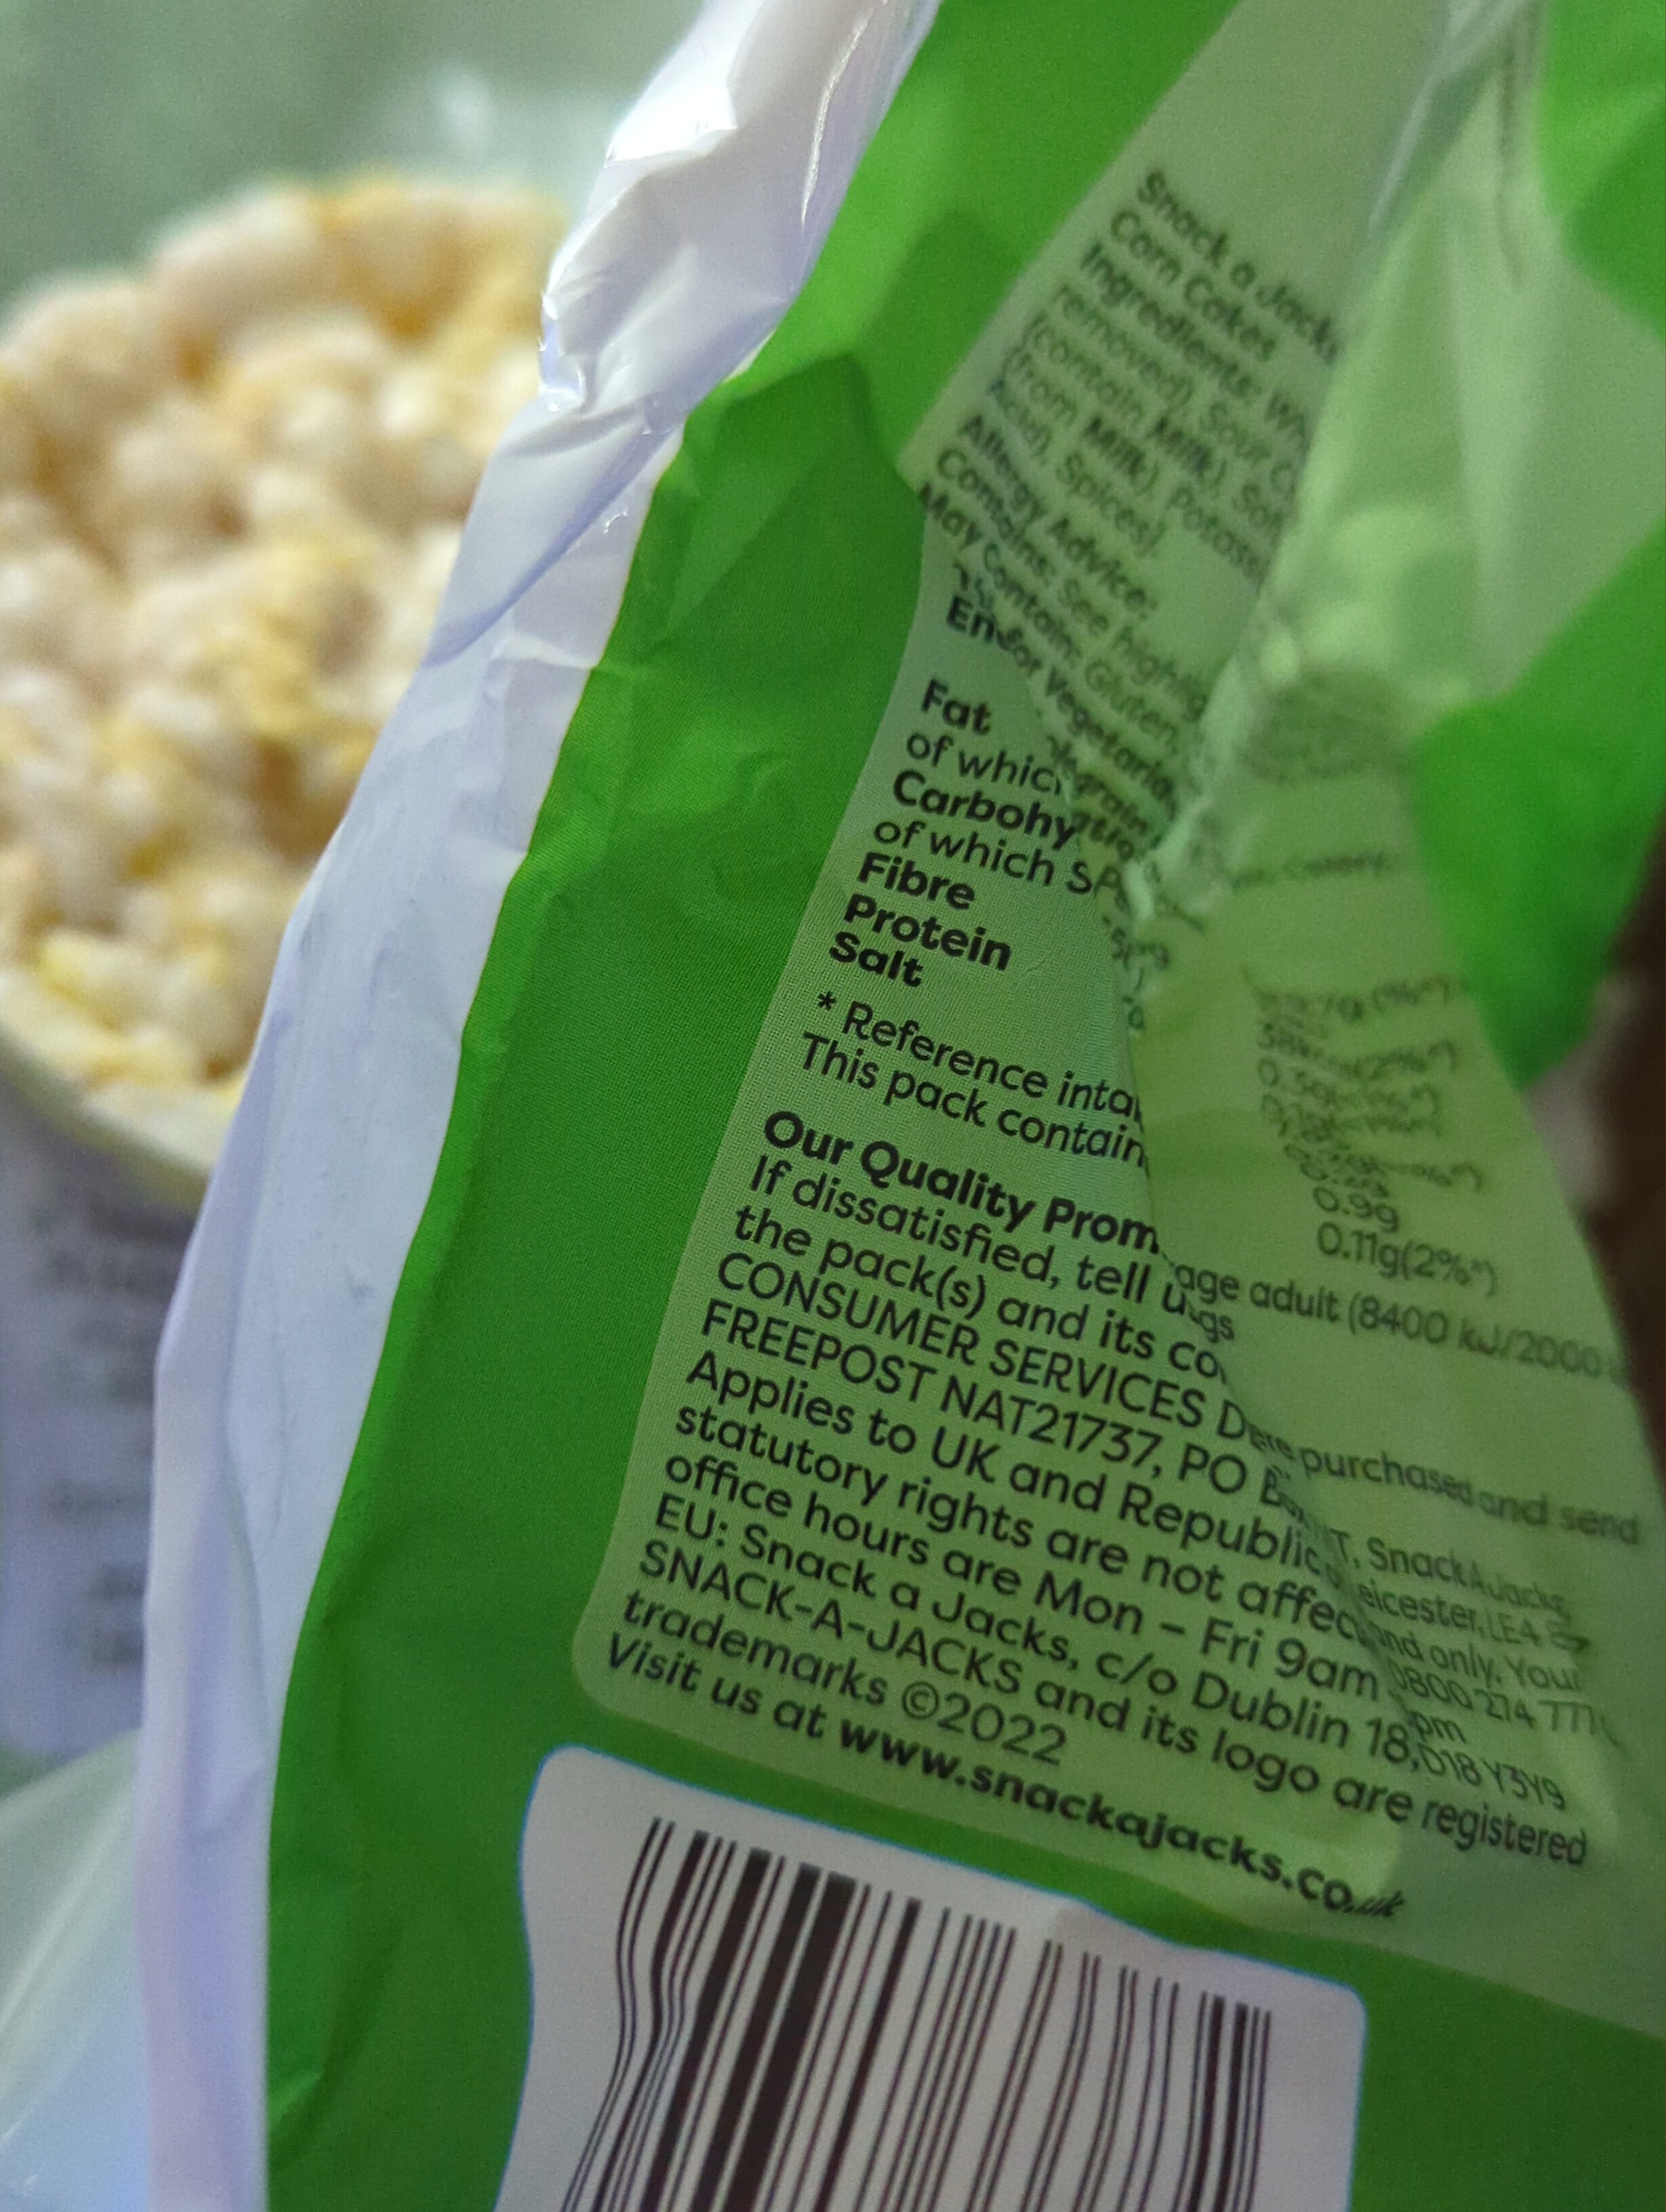 Cool Sour cream & chive - Recycling instructions and/or packaging information